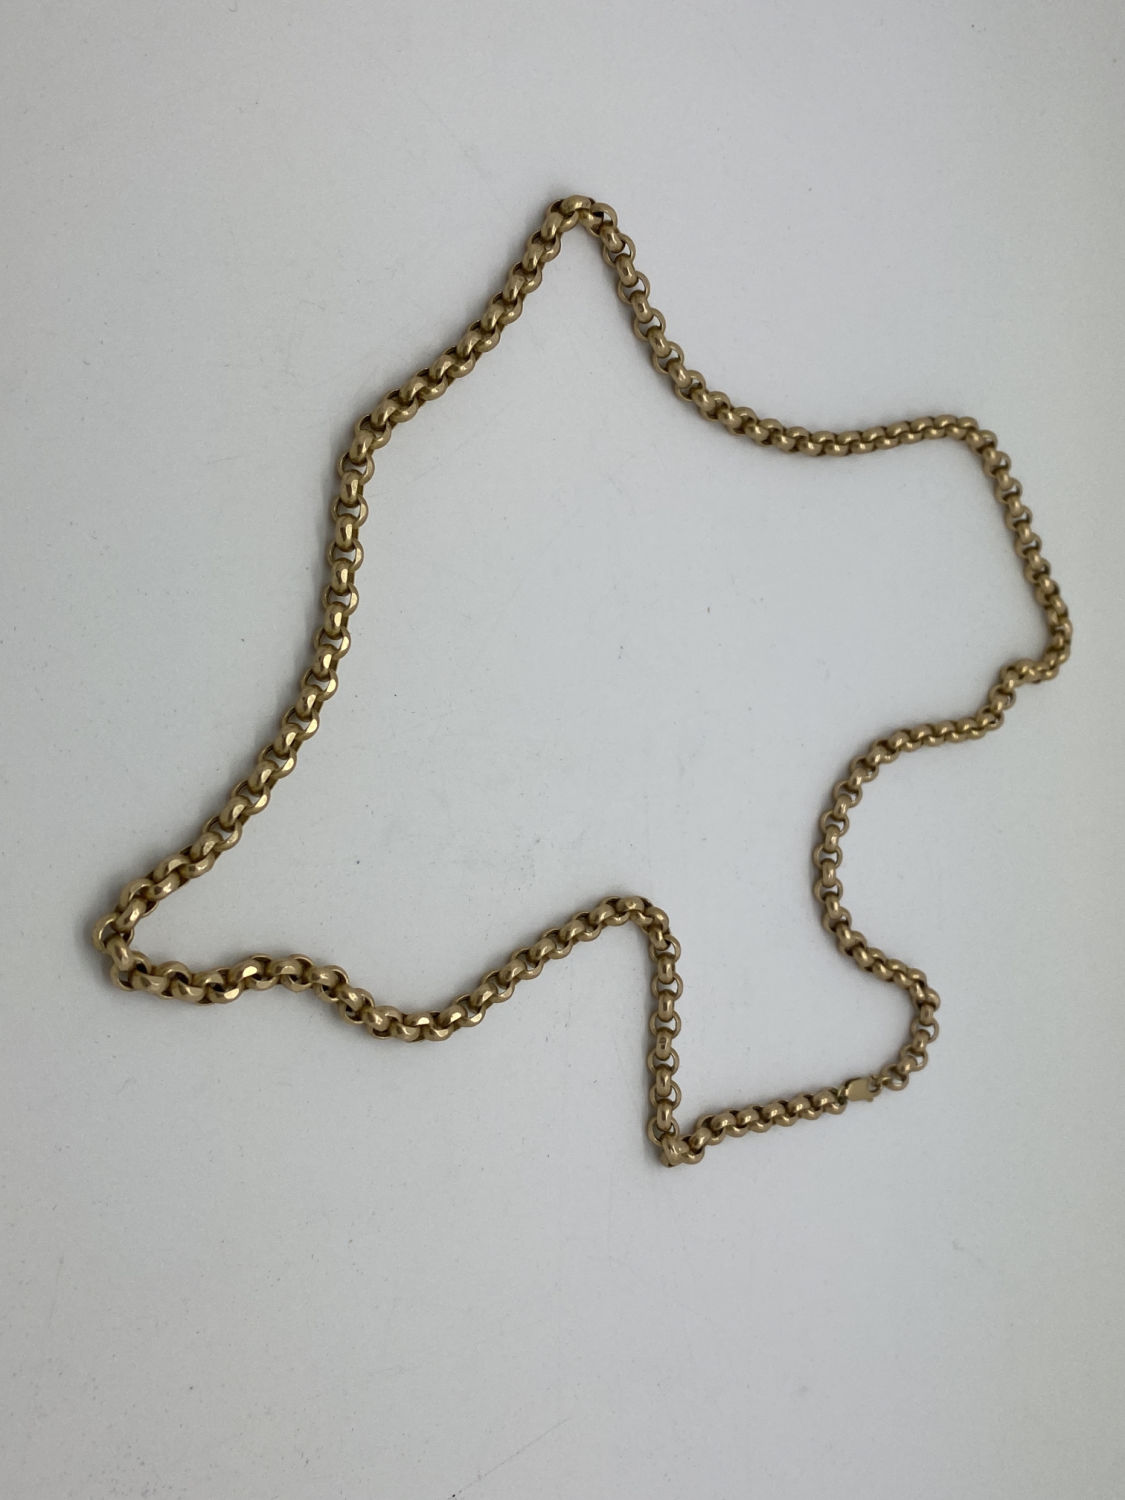 APPROX 20"""" TRIPLE BELCHER GOLD COLOURED CHAIN APPROX 27 GRAMS - TESTED AS AT LEAST 9ct GOLD